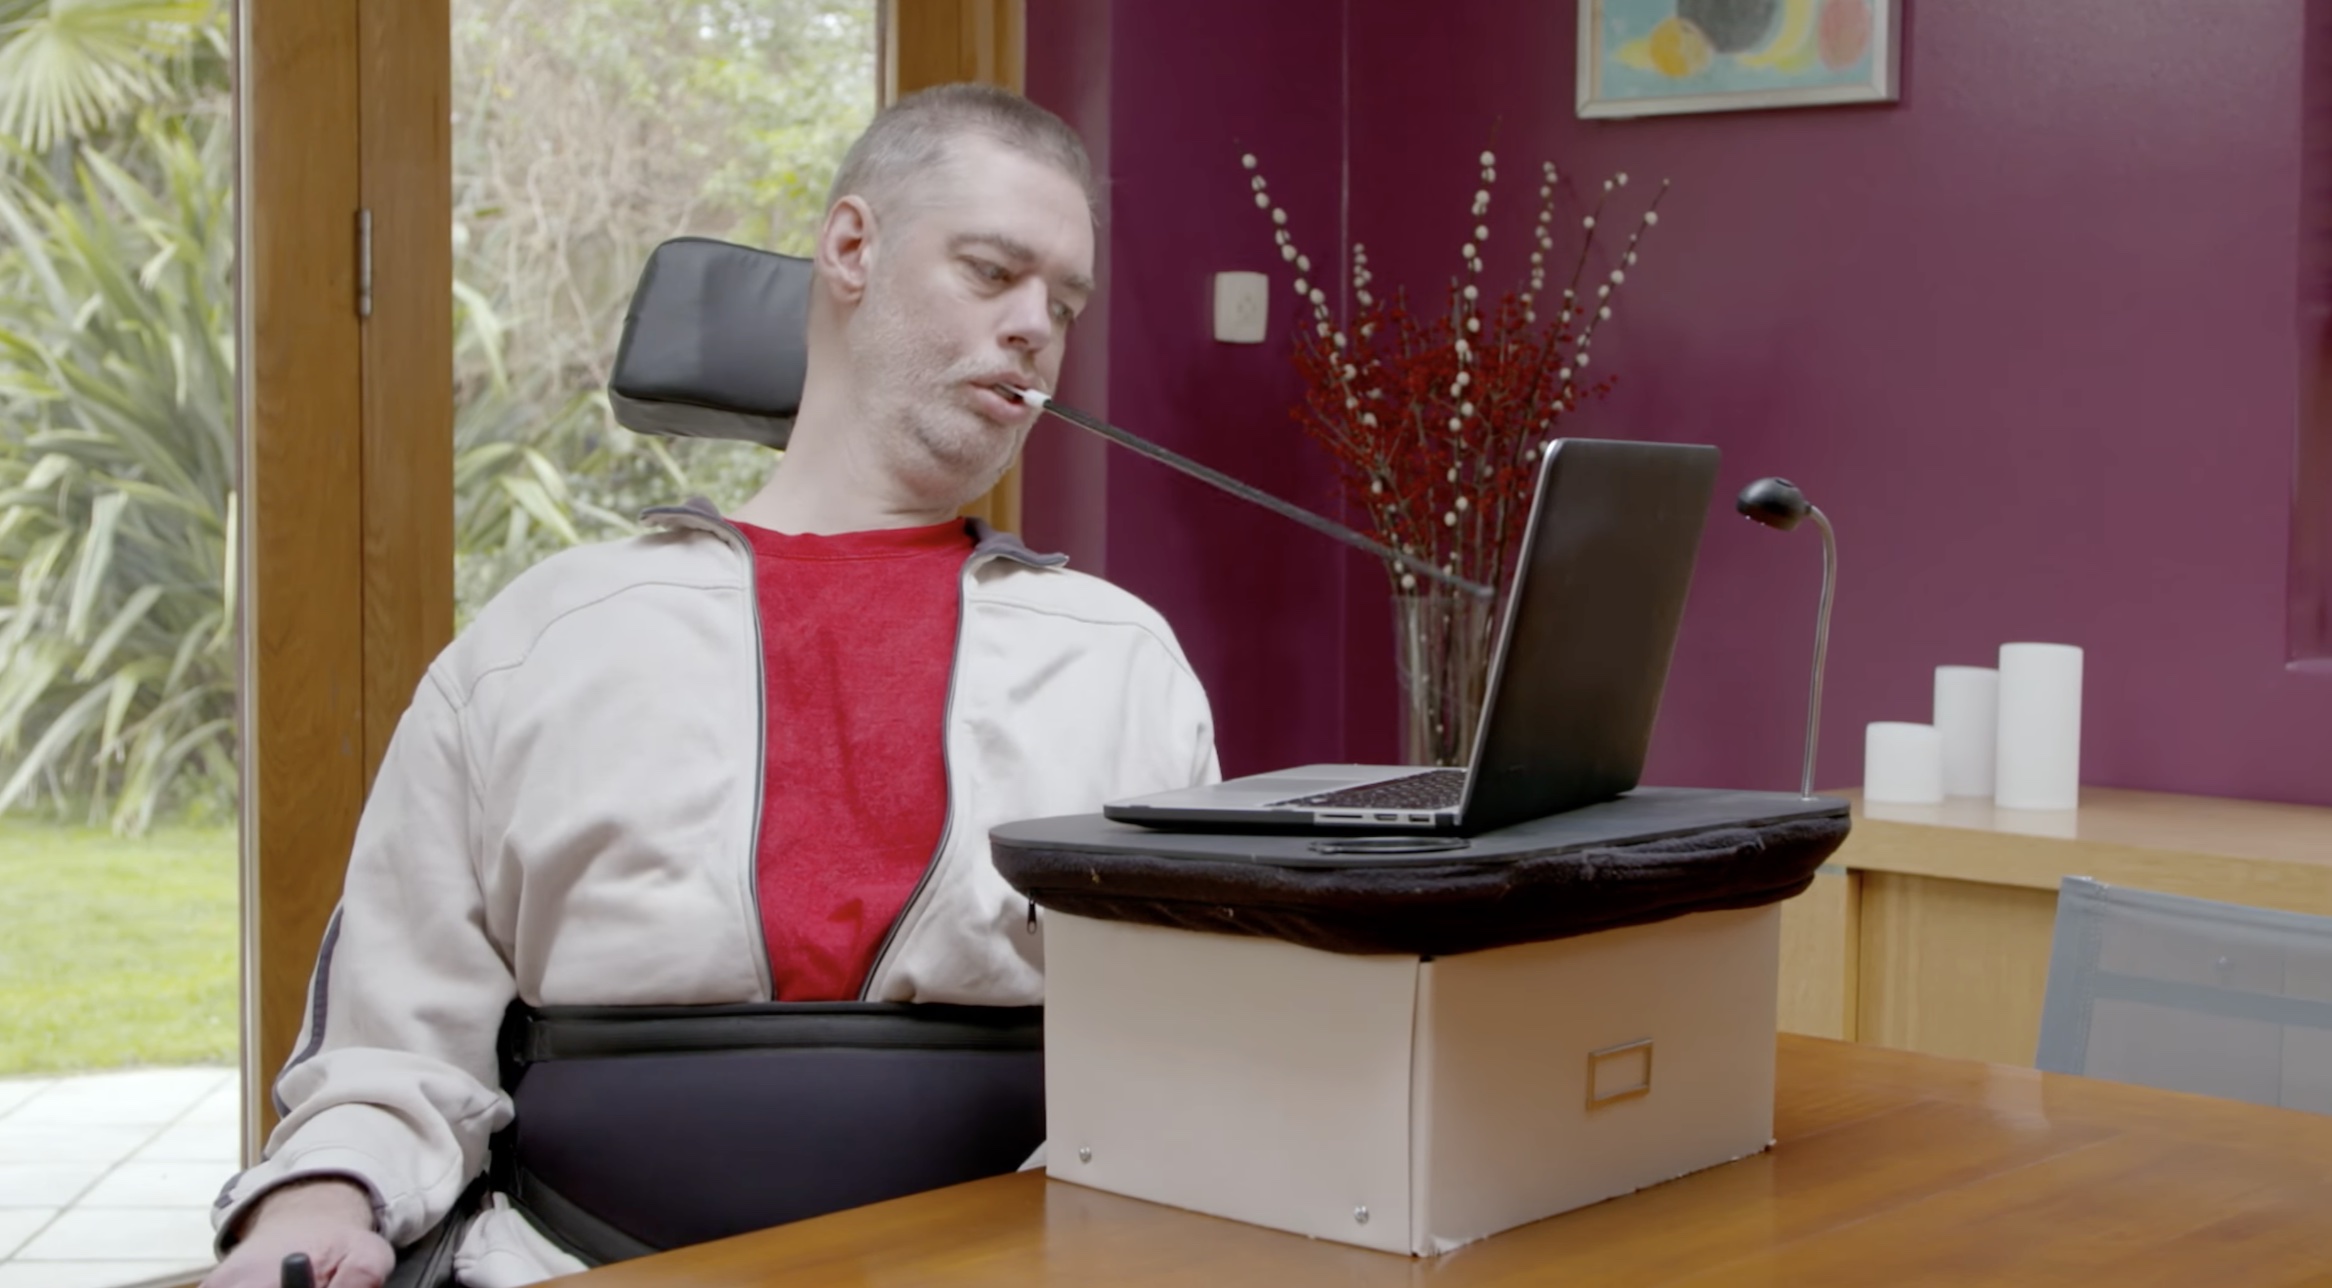 A man in a wheelchair at his desk, holding a pointing device with his mouth and using the keyboard on his laptop